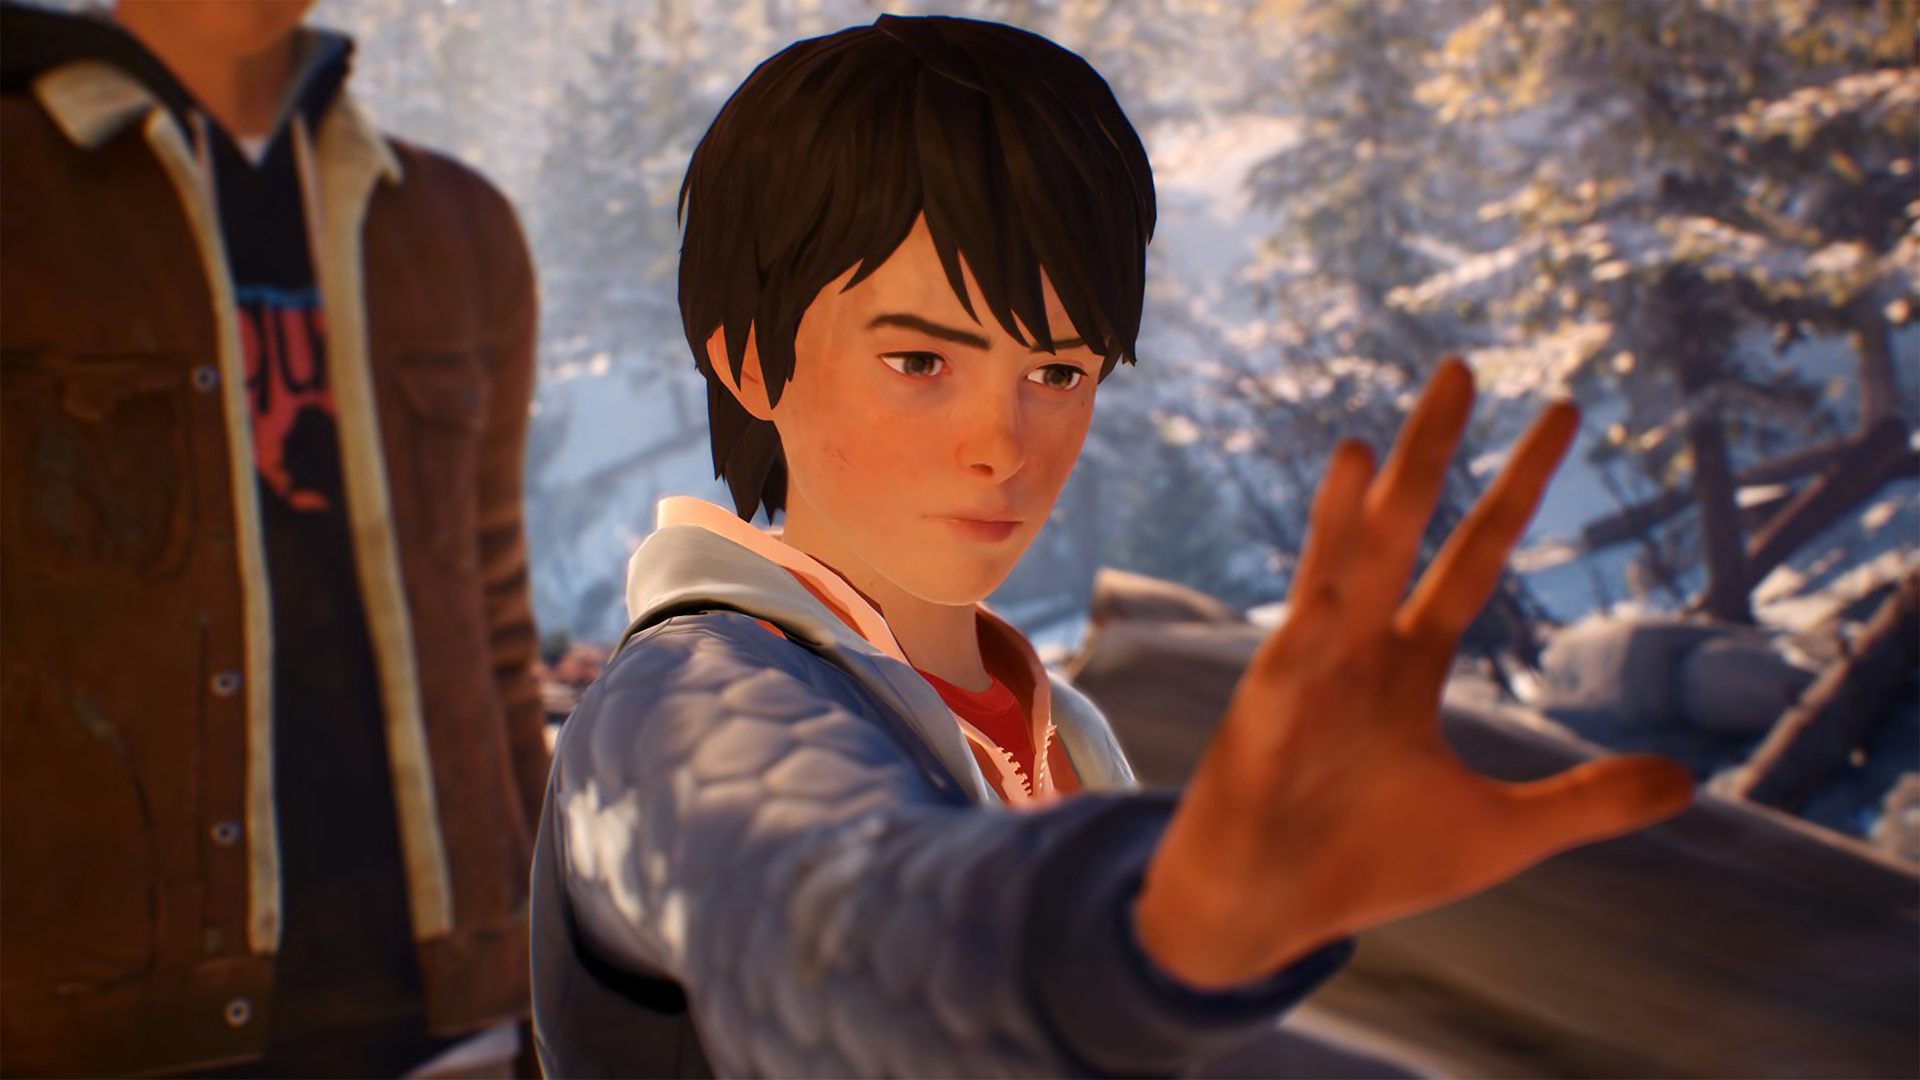 Tell Me Why review – Life is Strange 2.5